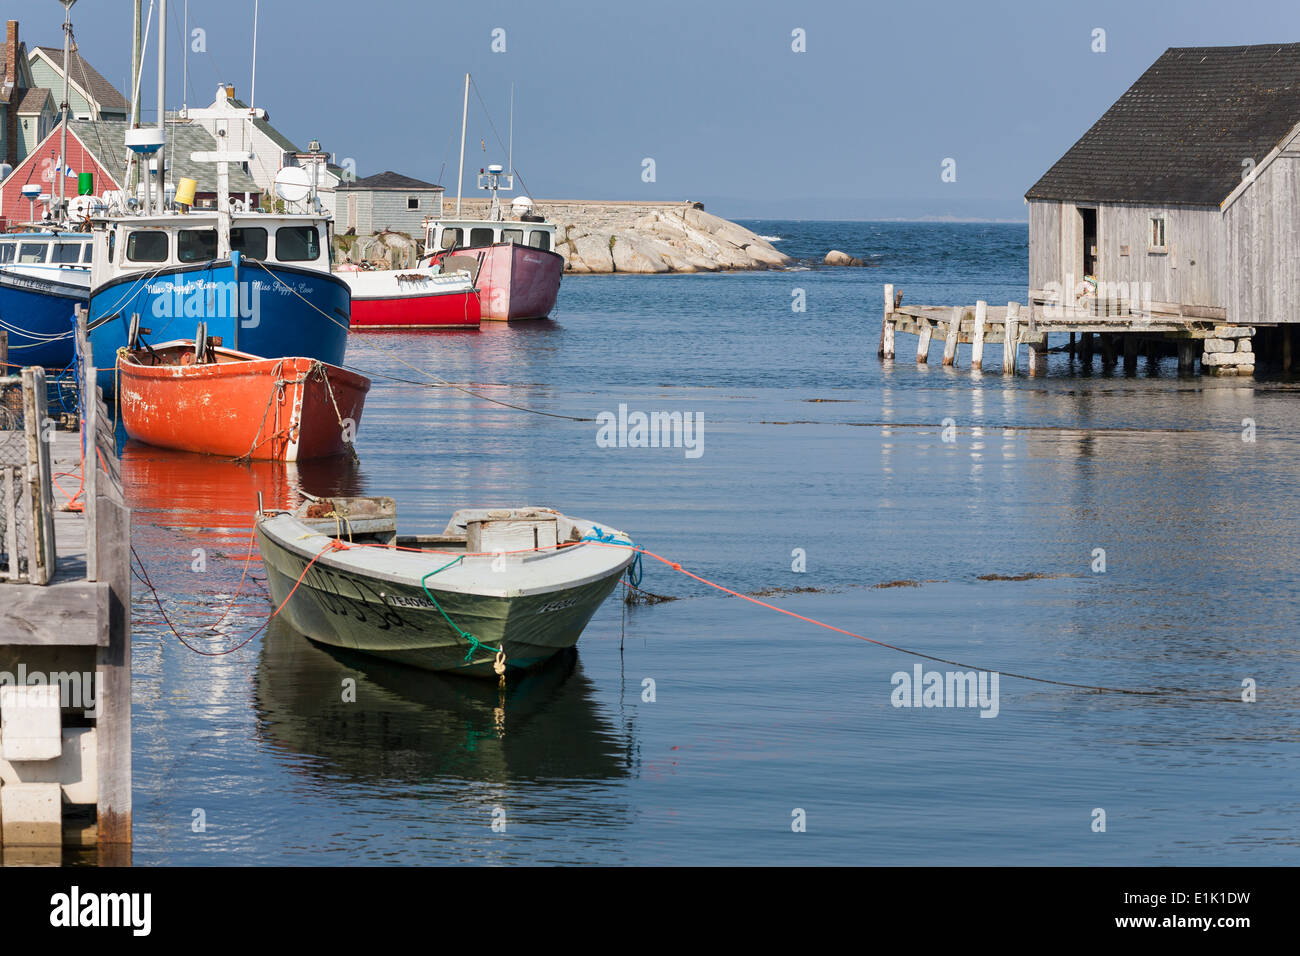 Peggy's Cove Harbour. A tranquil scene of the small harbour at Peggys Cove. Miss Peggy's Cove a blue fishing boat is tied up. Stock Photo